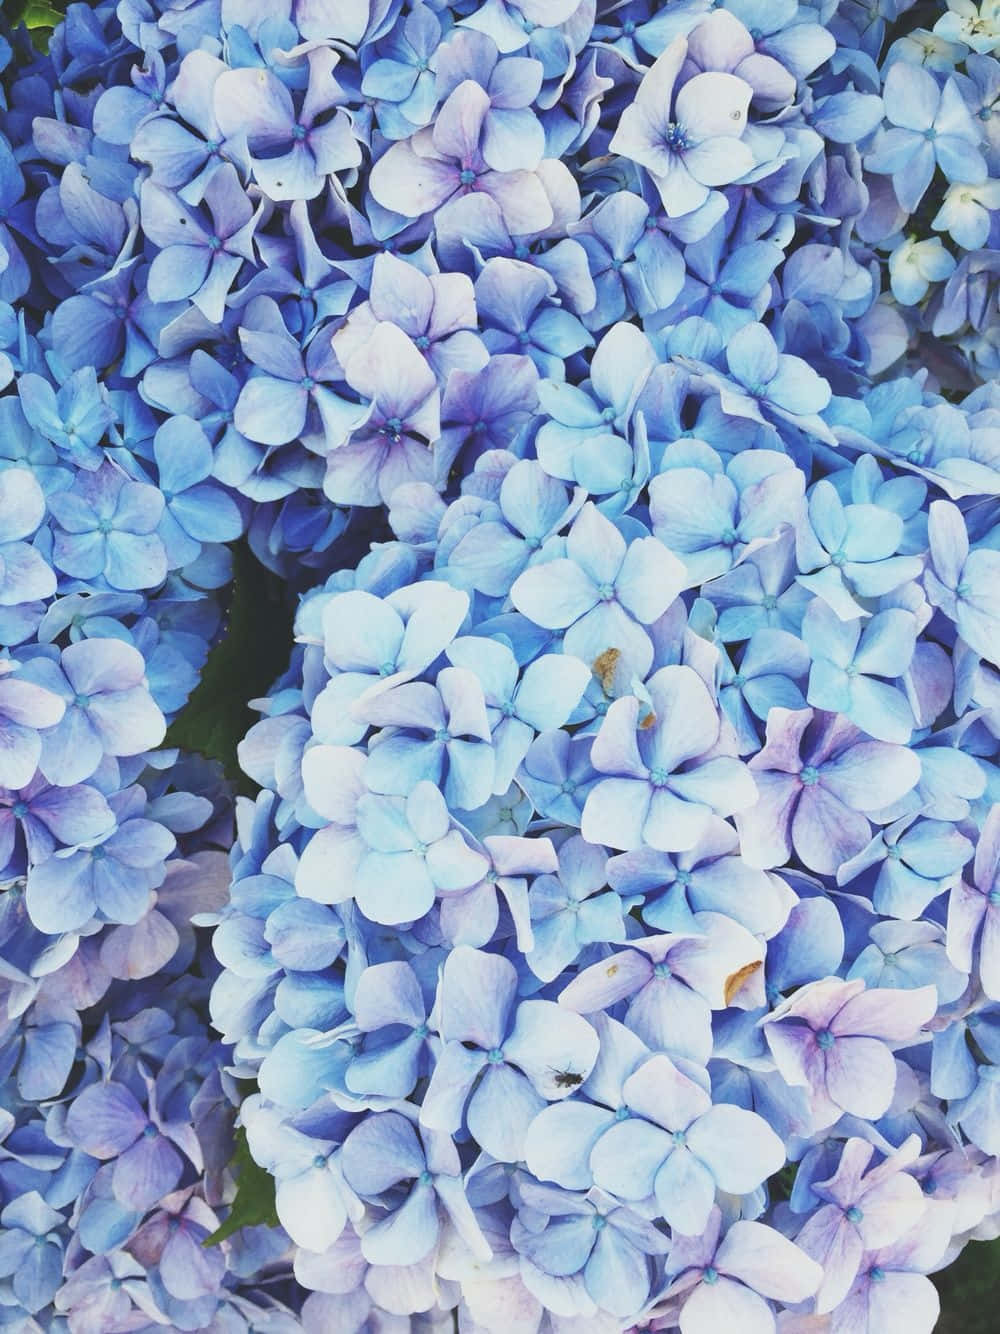 Blue Flowers Lumped Together Aesthetic Wallpaper